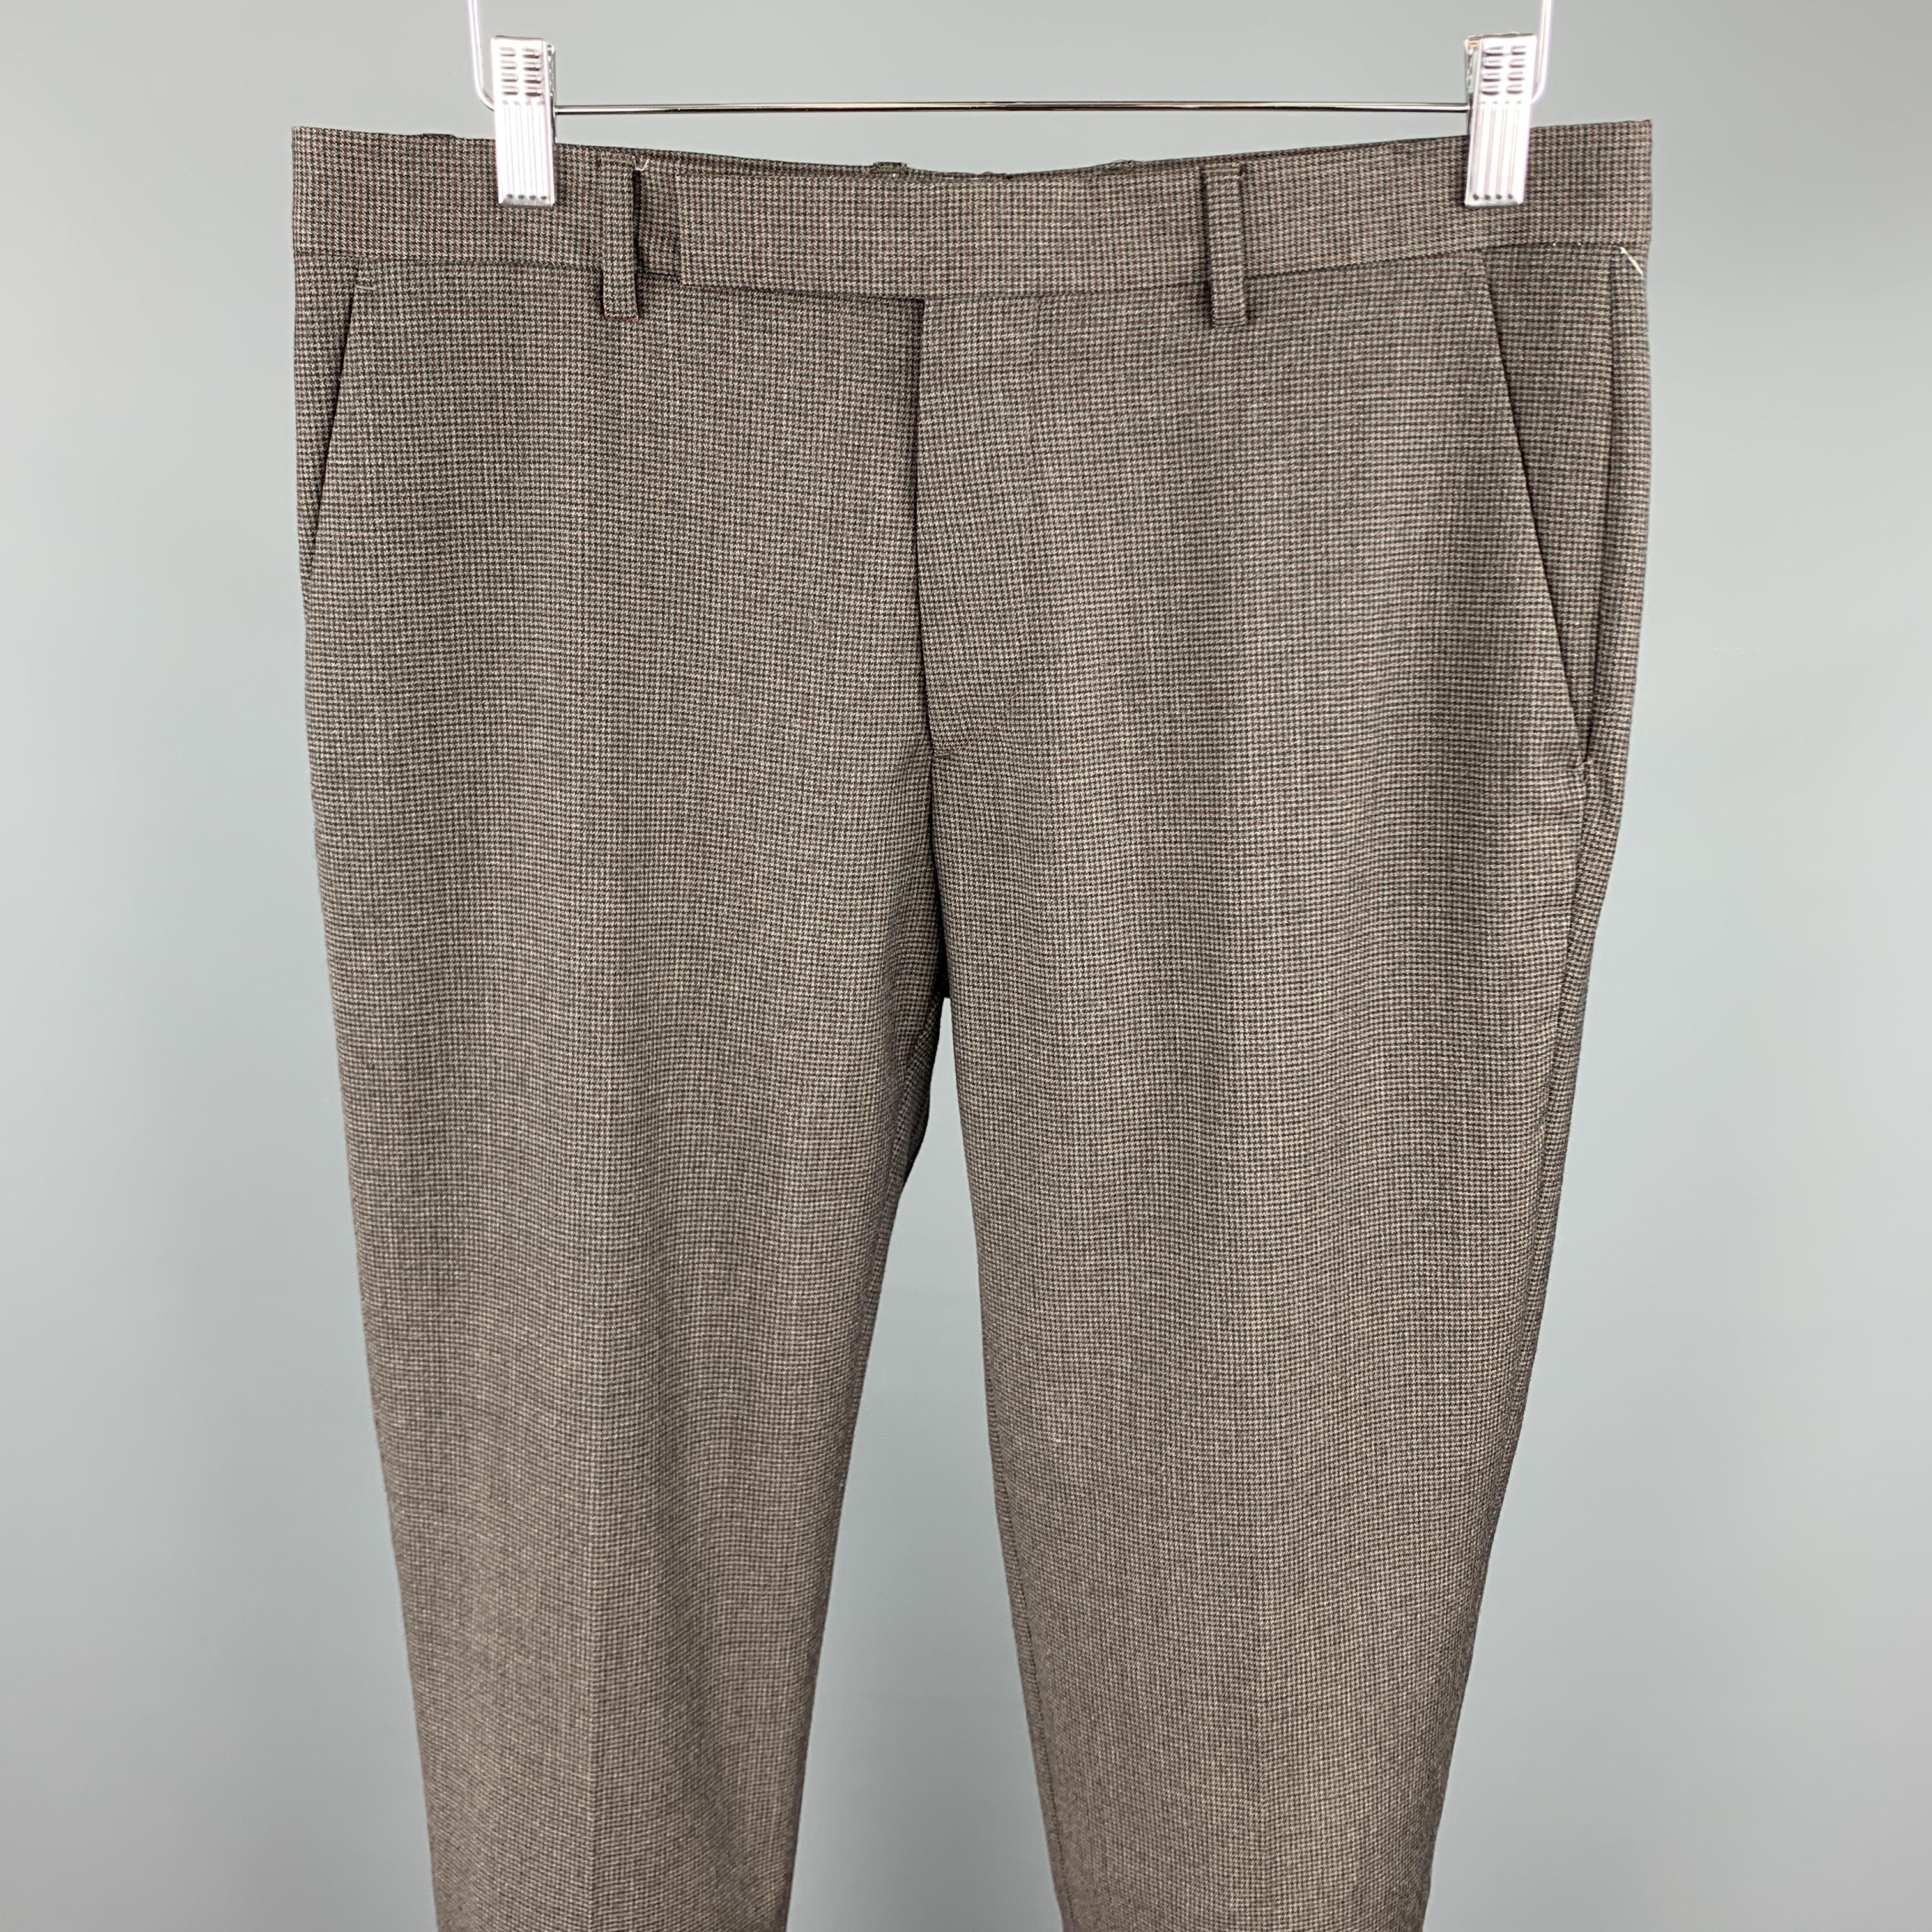 MAISON MARGIELA dress pants comes in a dark brown houndstooth featuring a slim fit and a zip fly closure. Made in Romania.

Excellent Pre-Owned Condition.
Marked: 48

Measurements:

Waist: 32 in.
Rise: 9 in.
Inseam: 34 in. 